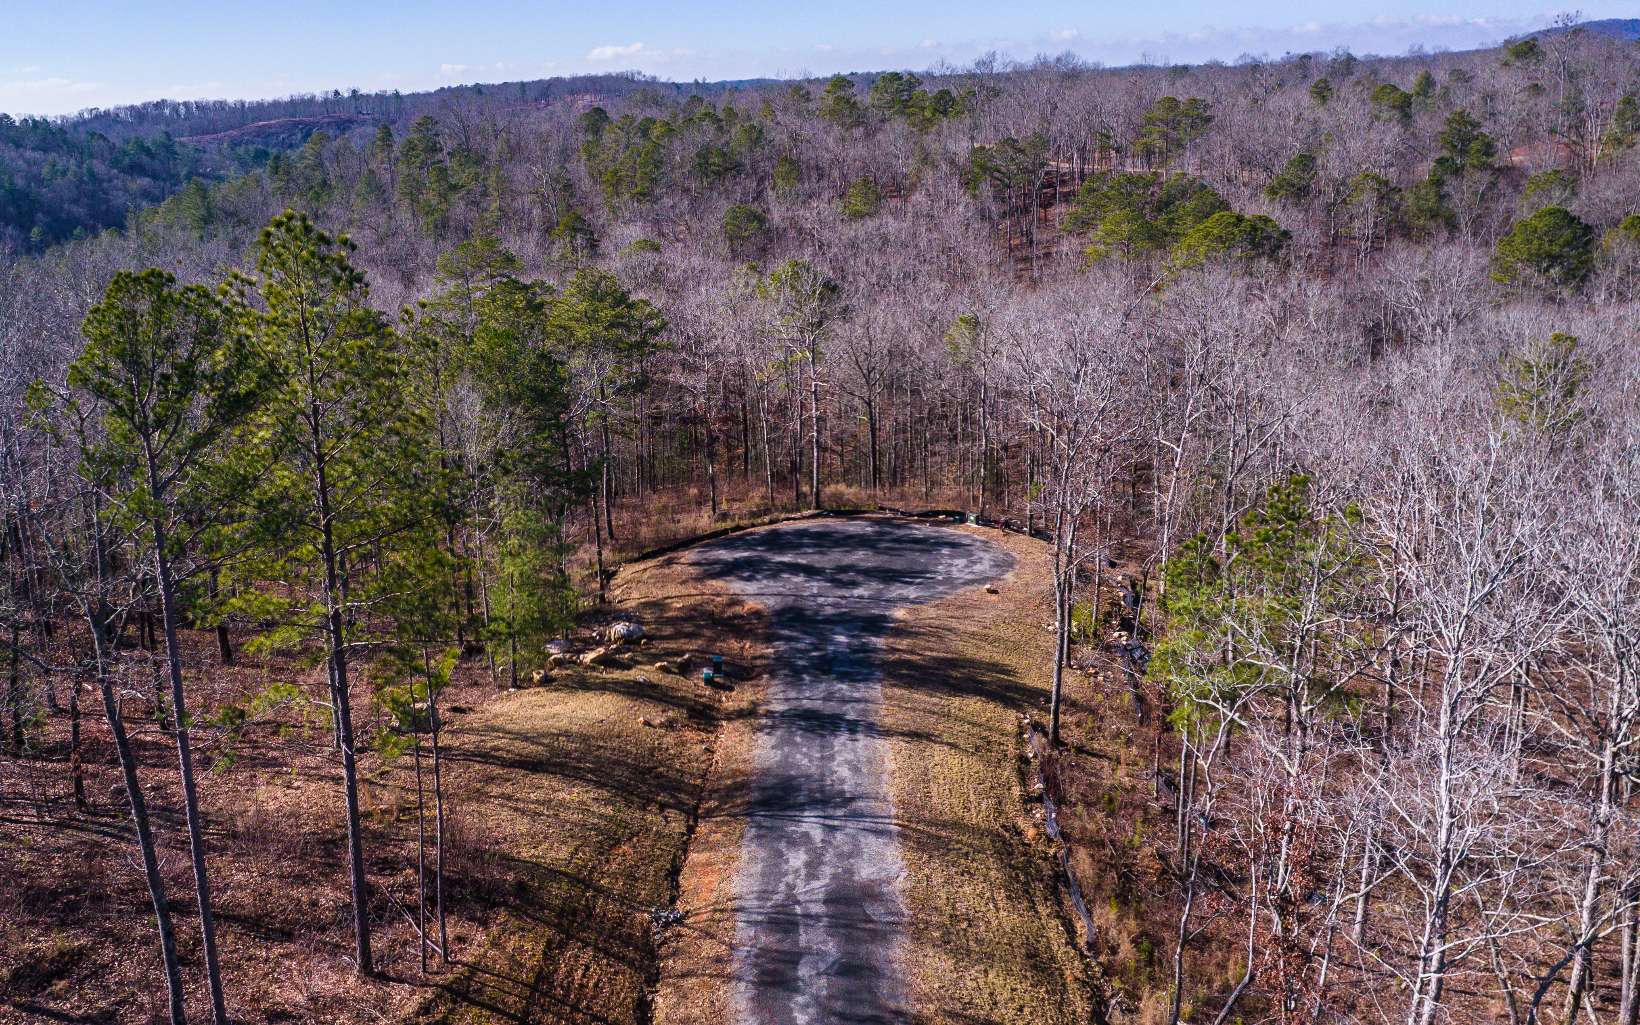 Enjoy the privacy and solitude on your very own 3.35 acres in one of Ellijay's newest communities of High River. This lot has river frontage and extreme privacy which is rare to find in a community with amenities. This lot is easy to build on with all paved roads and electric at the lot. All it needs is your plans and your builder! Enjoy everything High River has to offer including gated access, a community Lodge on Mountaintown Creek, Coosawattee River access, and Lake Lecroy fishing and picnic area. Only 15 minutes from downtown Ellijay, 10 minutes from Carter's Lake, and a short drive to anything else North Georgia has to offer!